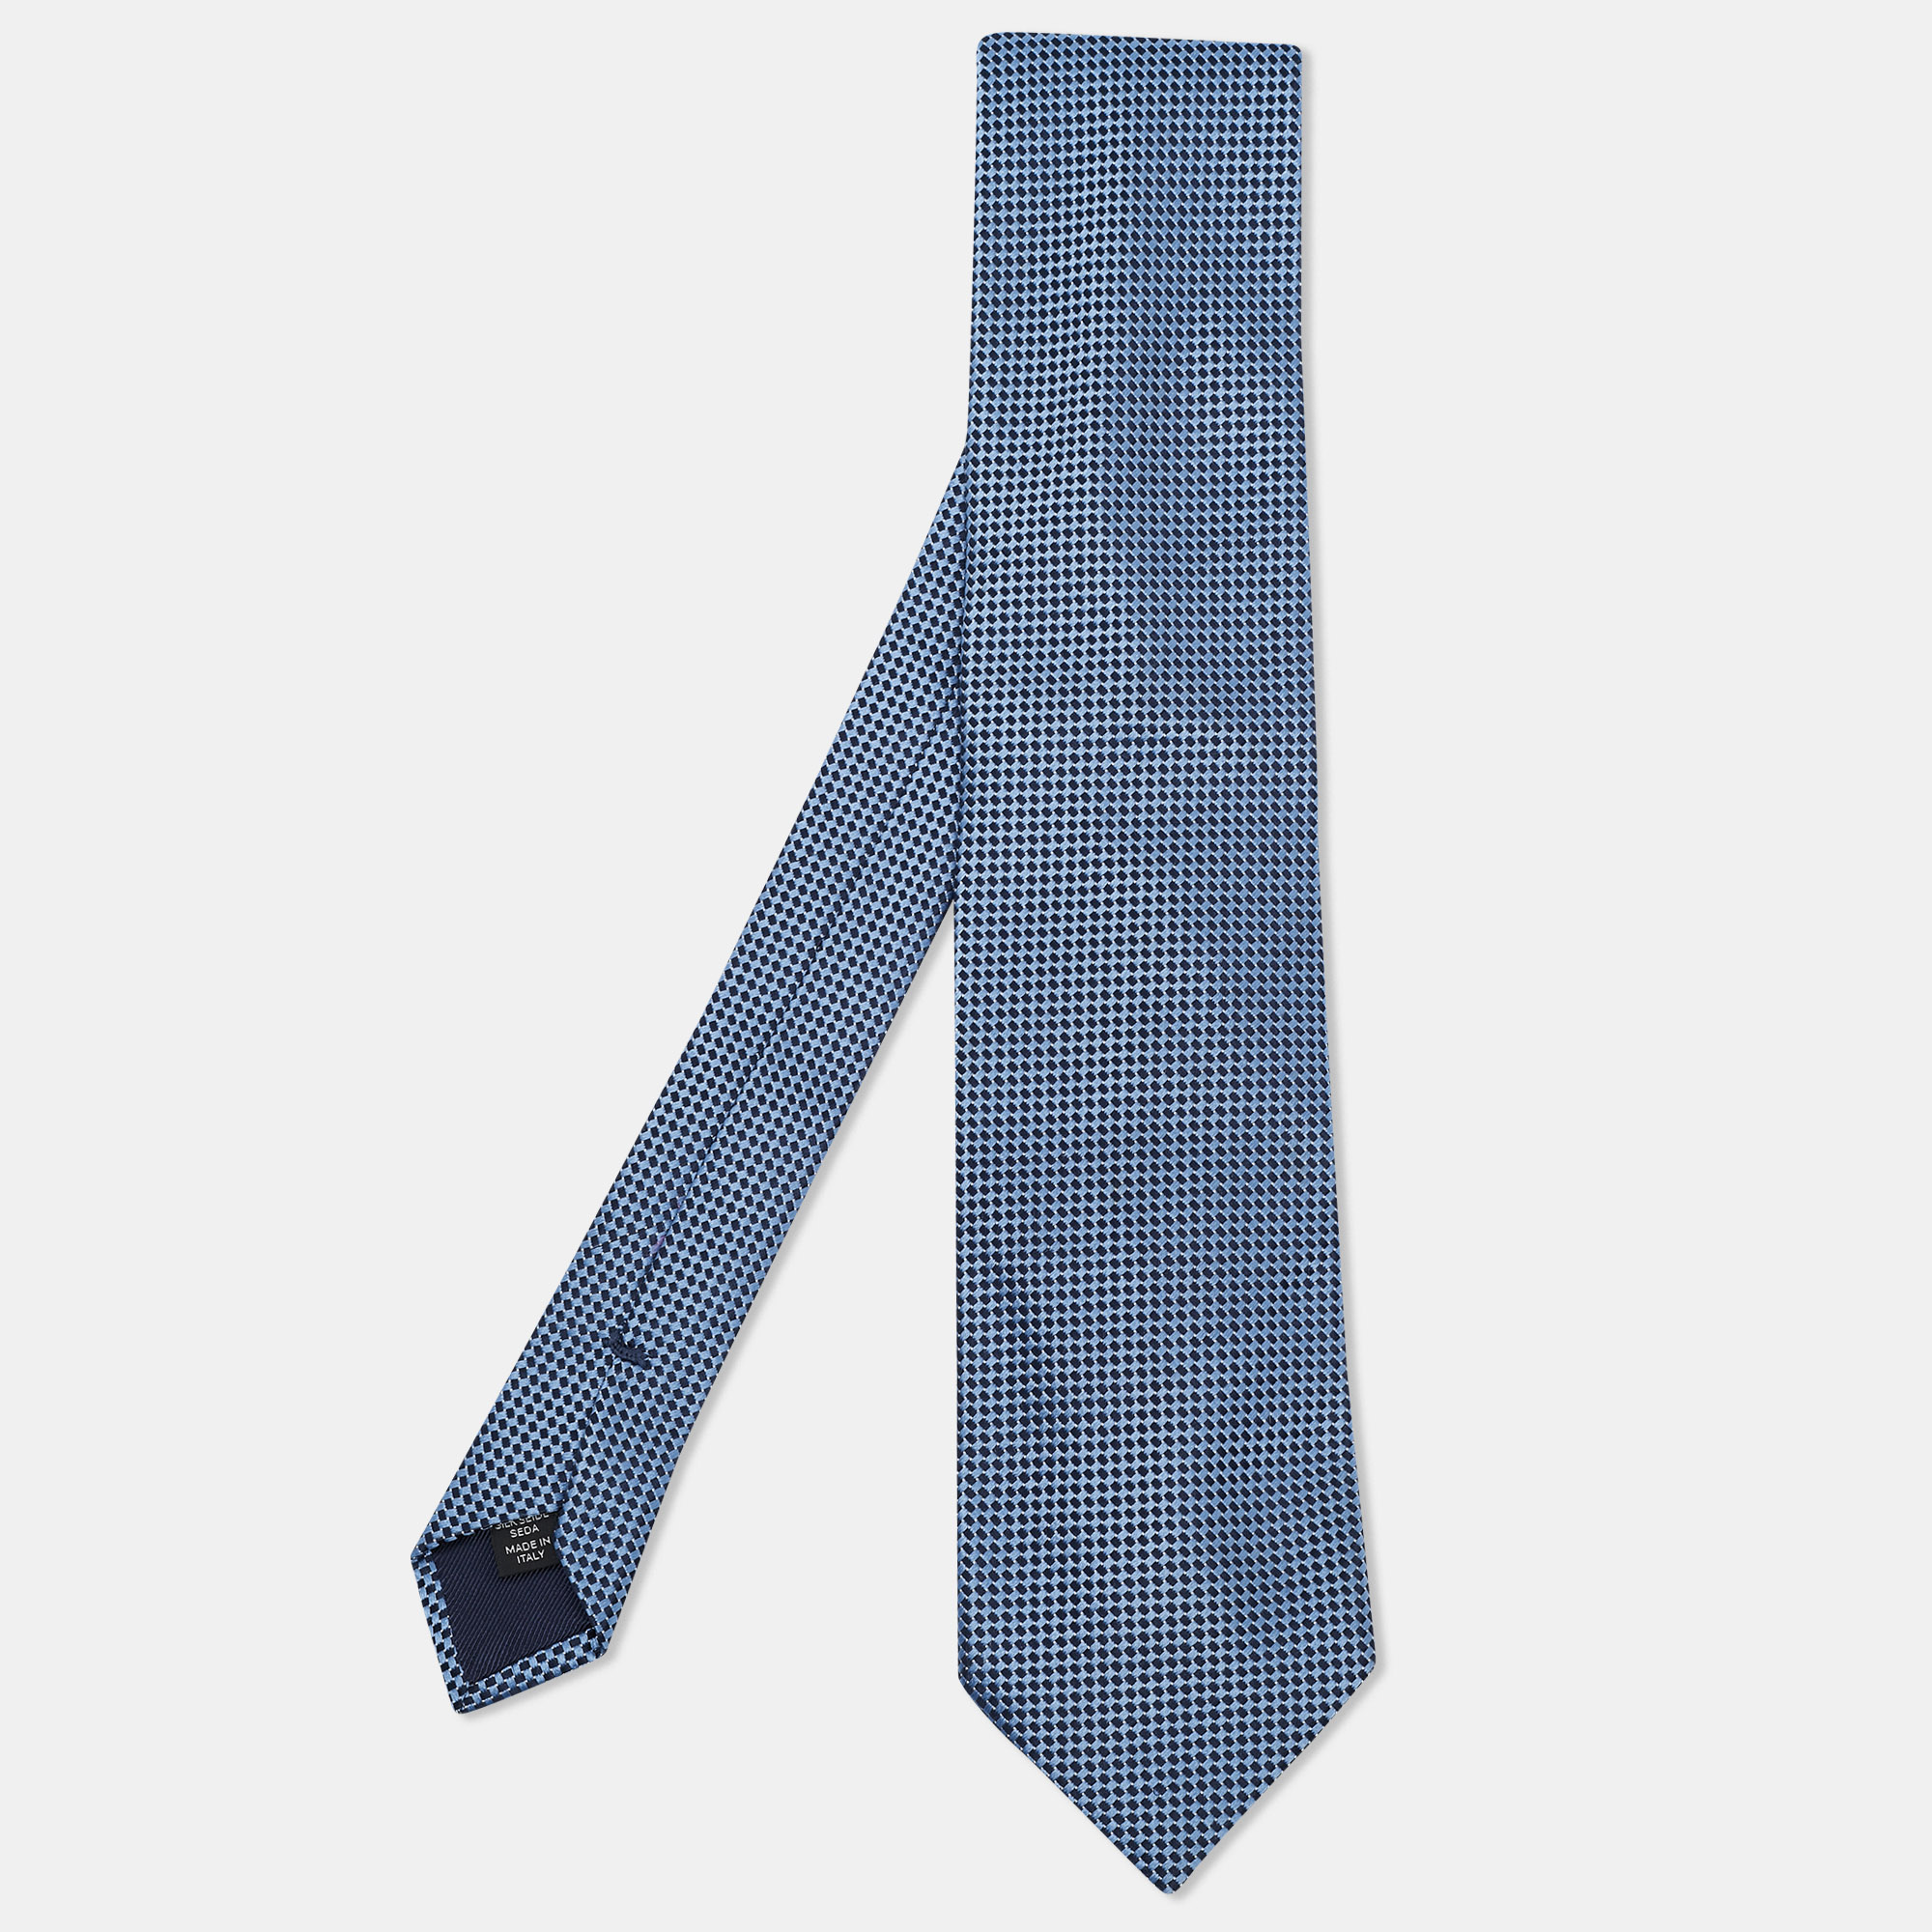 This tie is a perfect formal accessory that has a sharp and modern appeal. Made from luxurious materials it features intricate patterns and the brand label is neatly stitched at the back. It is sure to add oodles of style to your blazers.